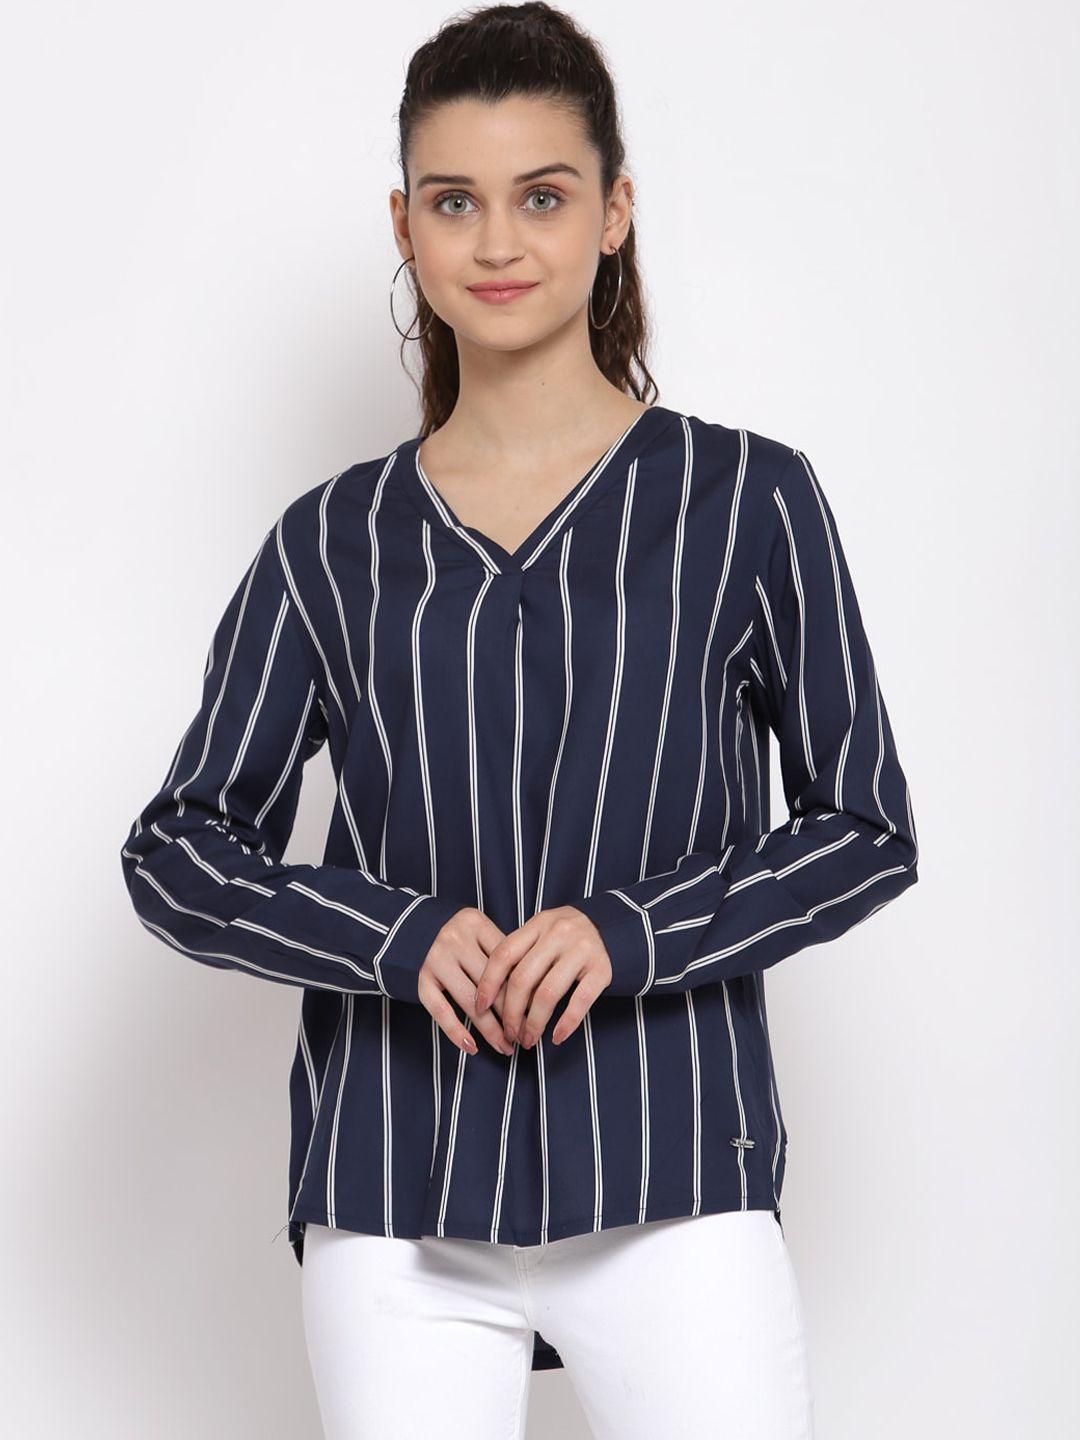 pepe jeans women navy blue striped high-low top